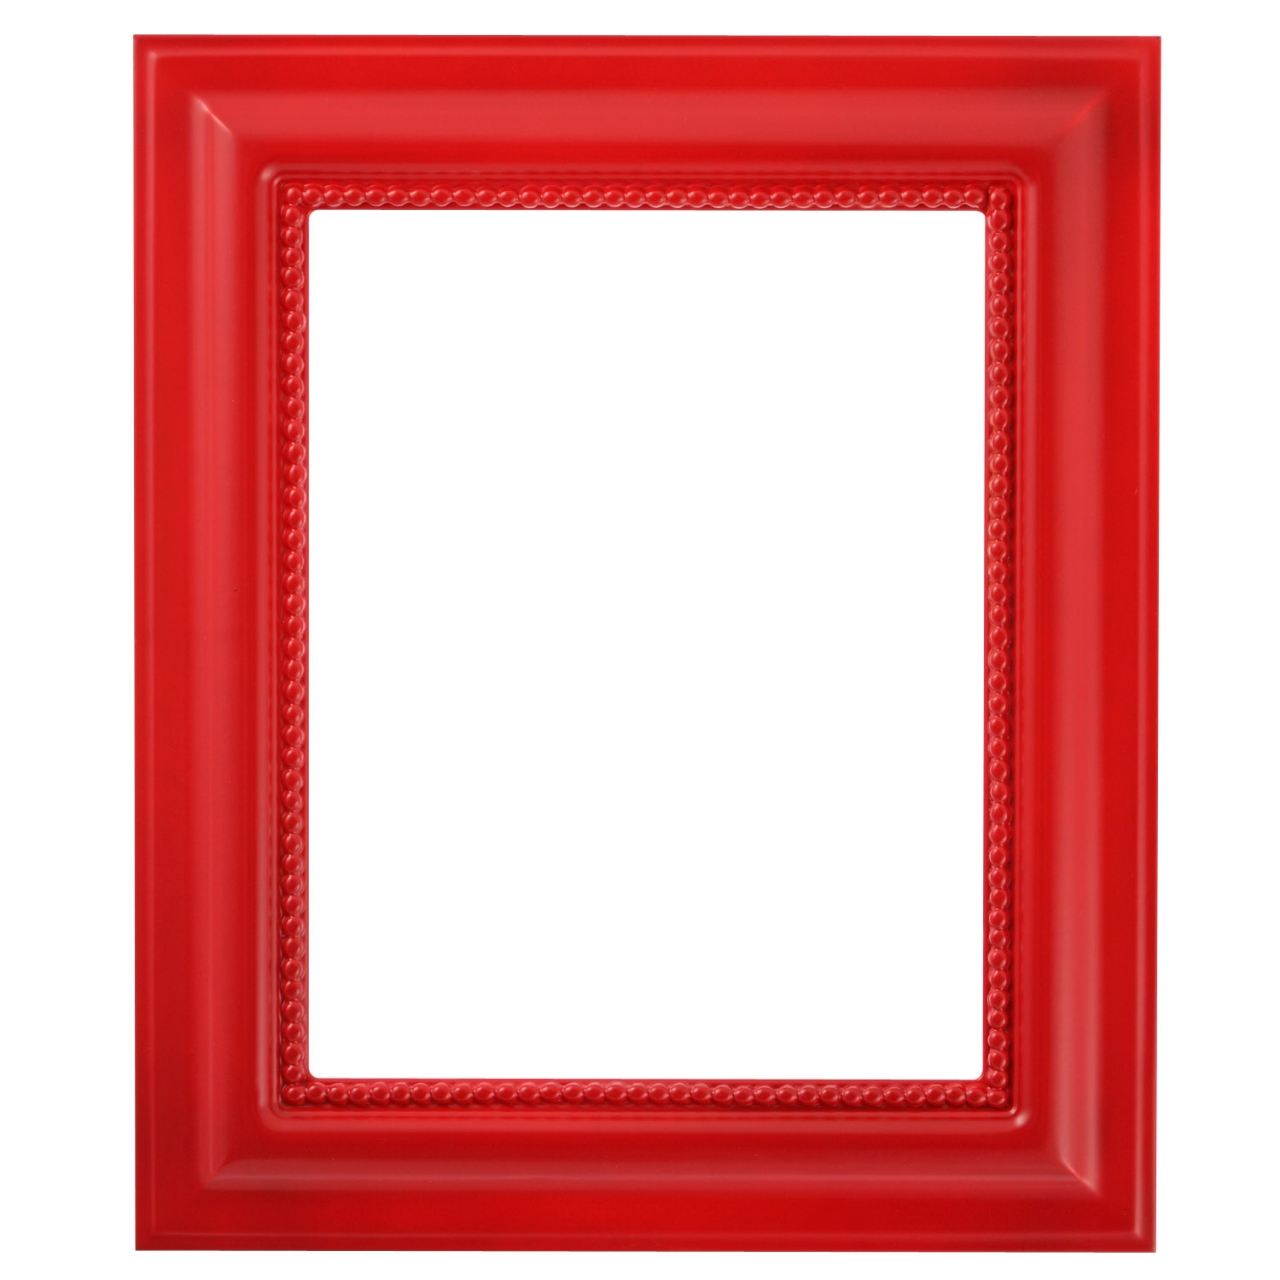 red frame clipart - photo #36